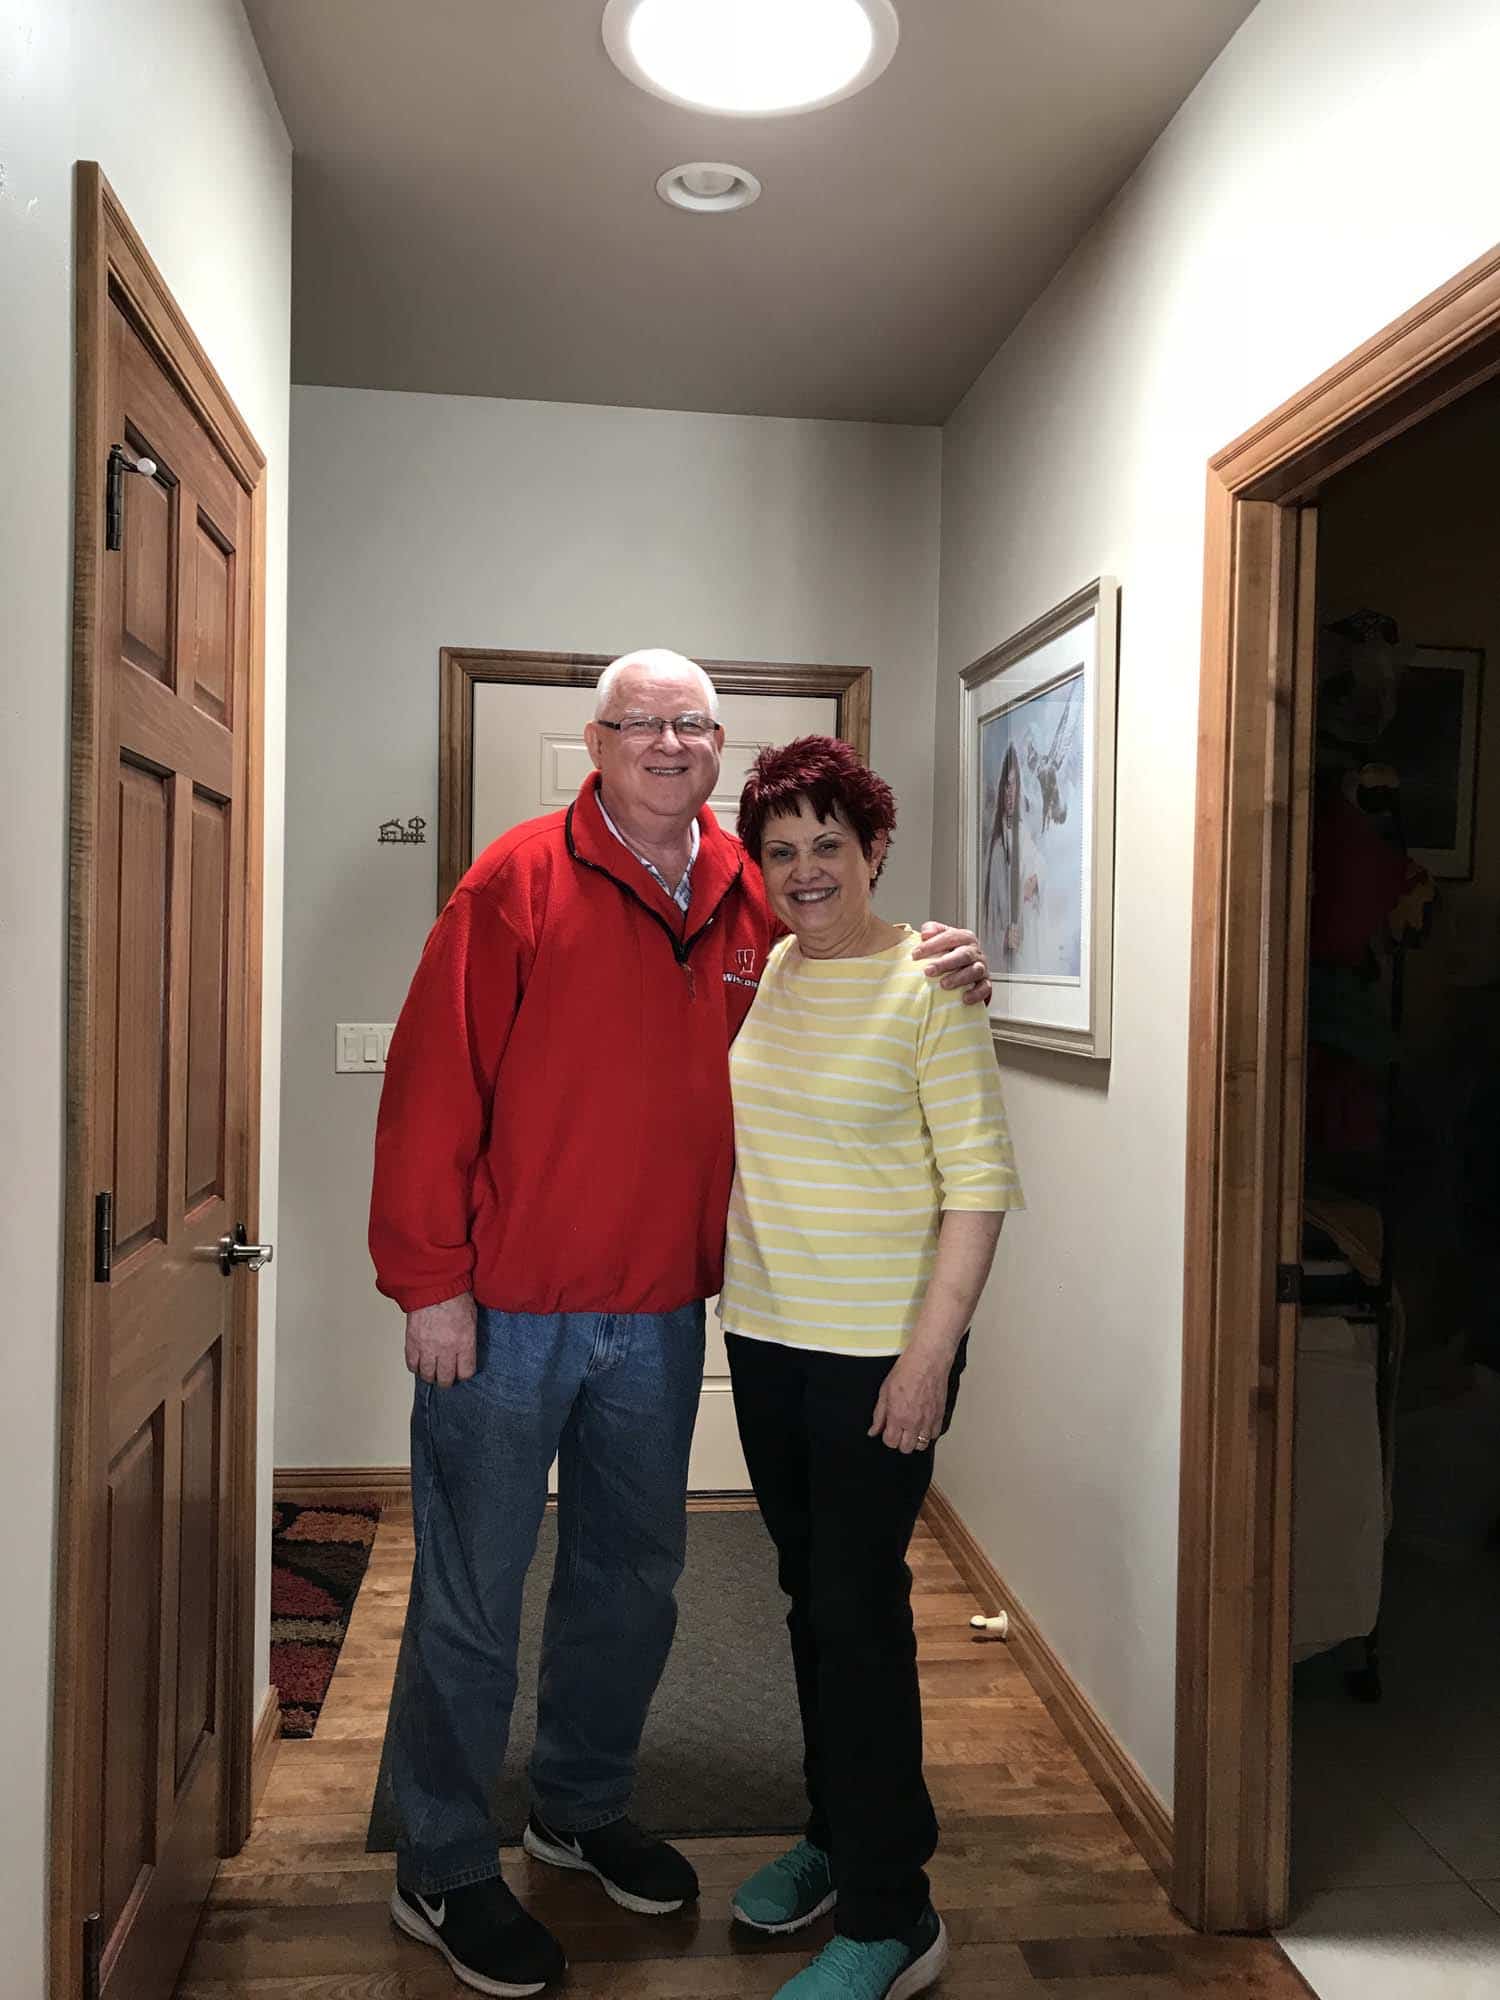 Husband & wife pose for a photo underneath their brand new VELUX skylight installed by Wisconsin Sunlight Solutions.